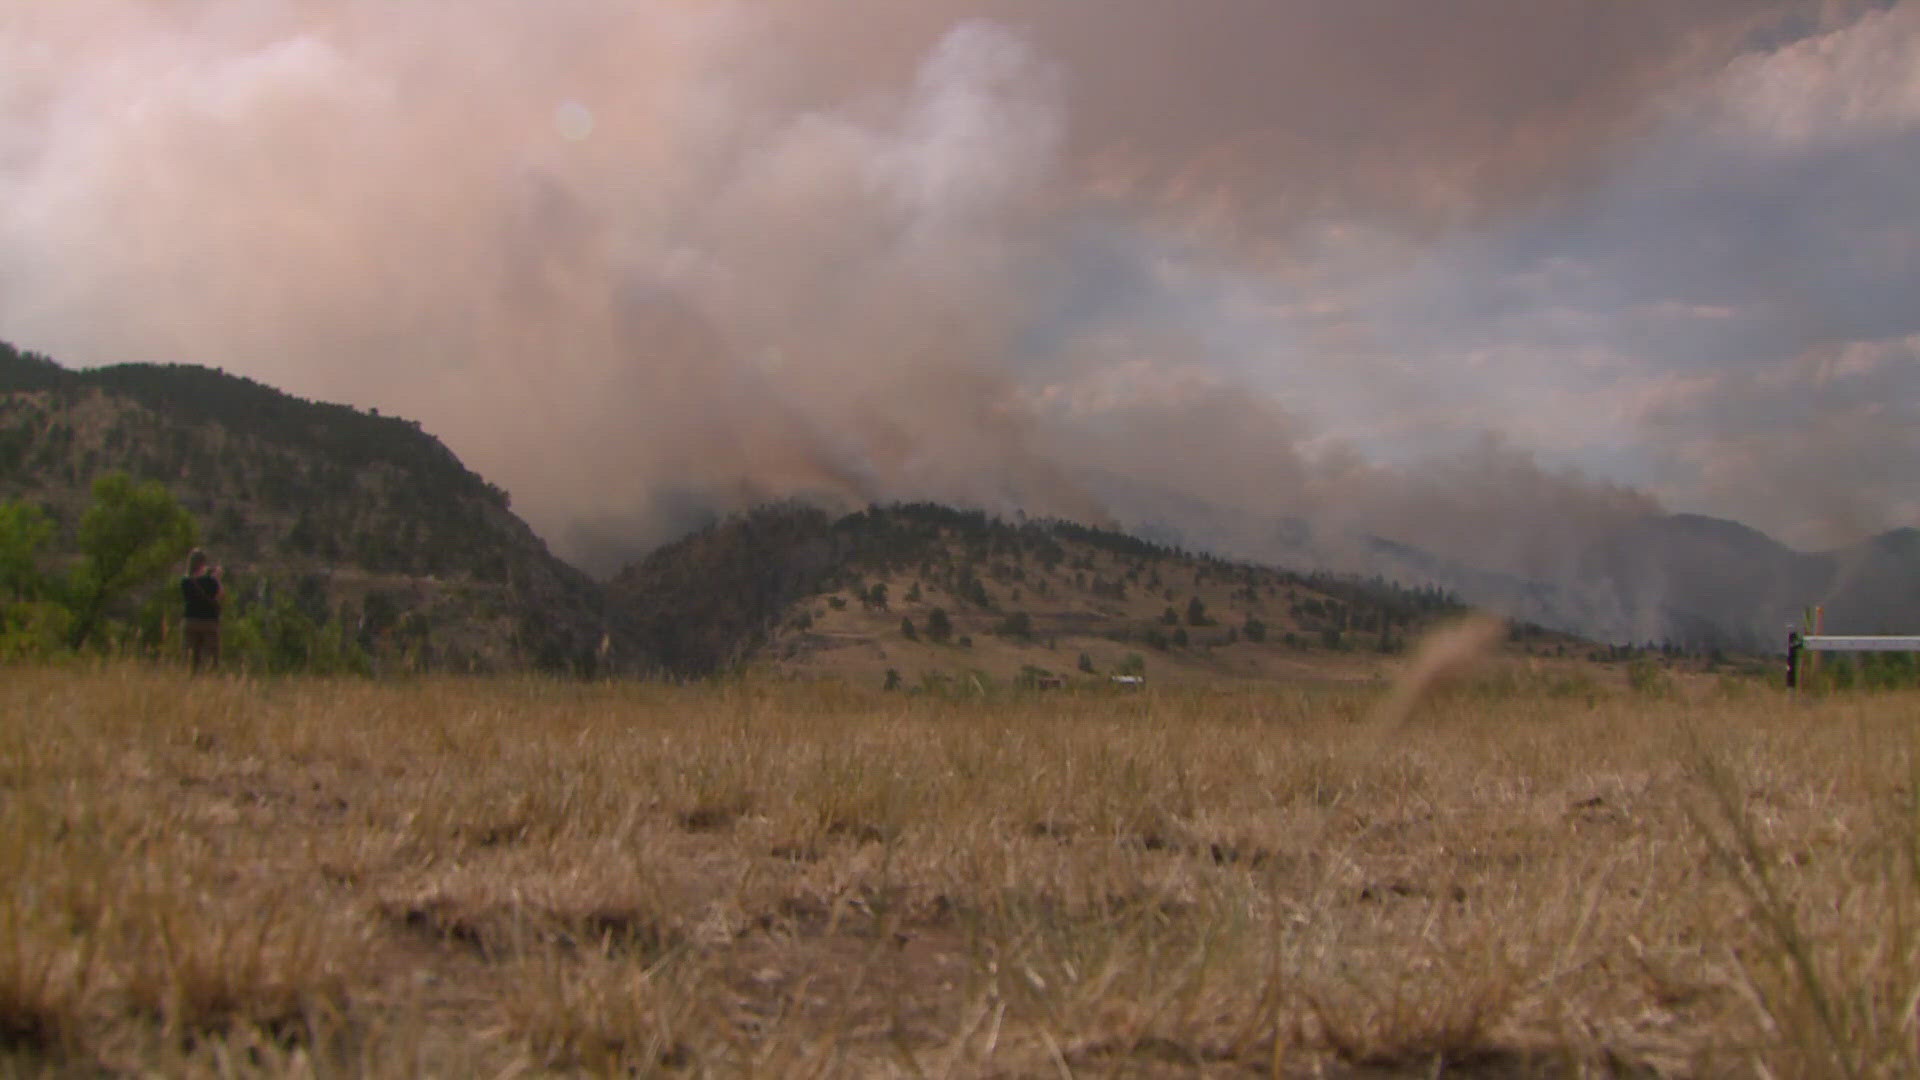 Officials said Wednesday that no one has been injured and no structures are known to be lost in the wildfire burning in the mountains west of Loveland.